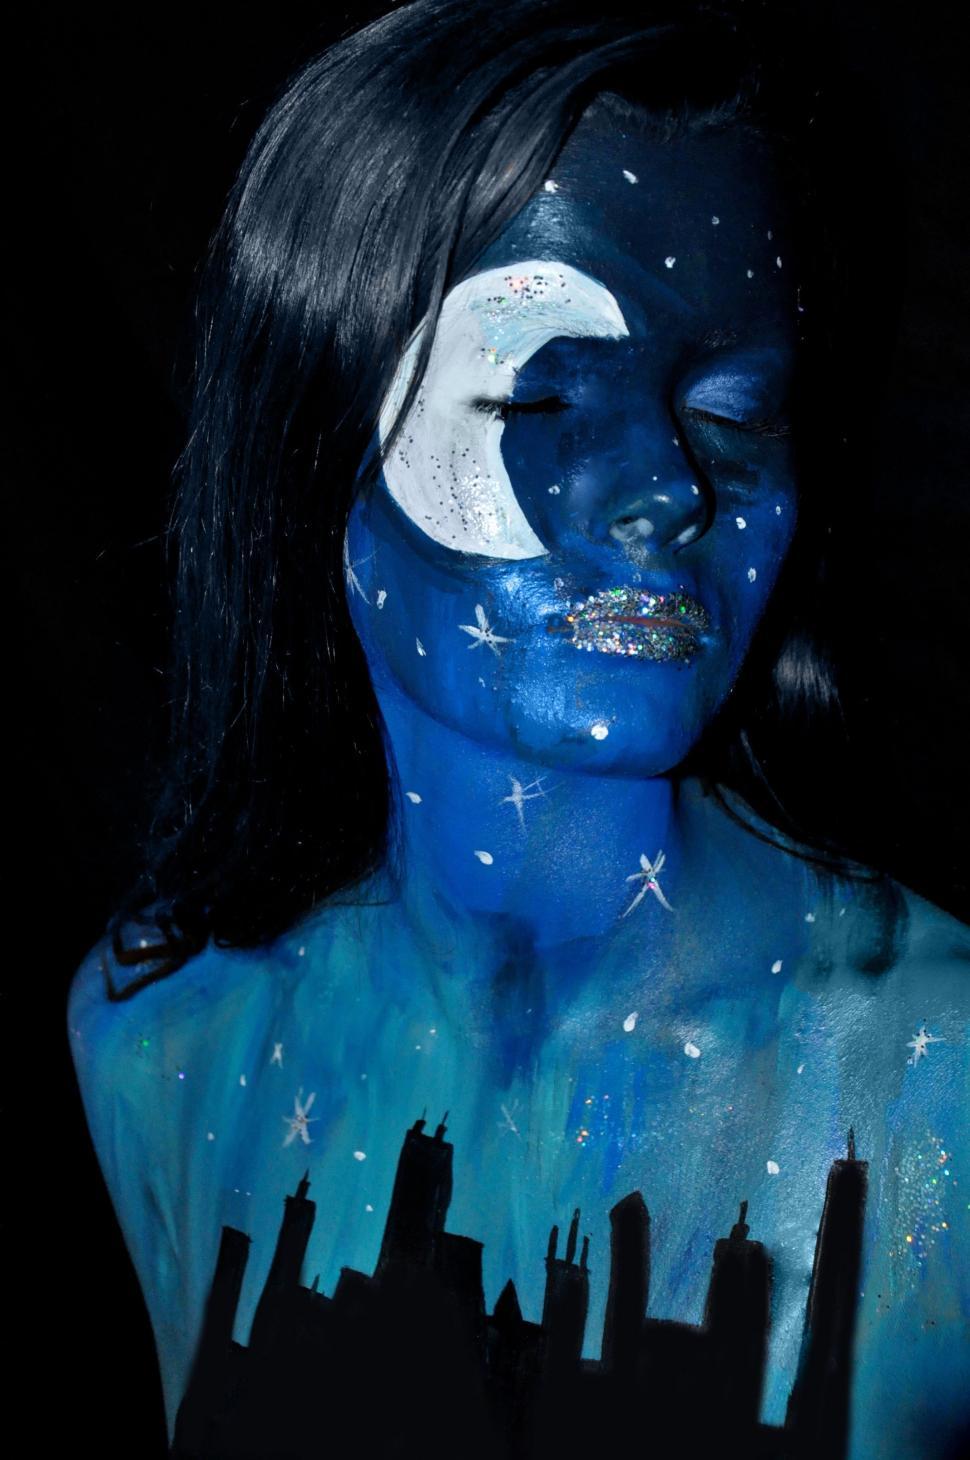 Free Image of Woman With Painted Face and Body Looking at Camera 